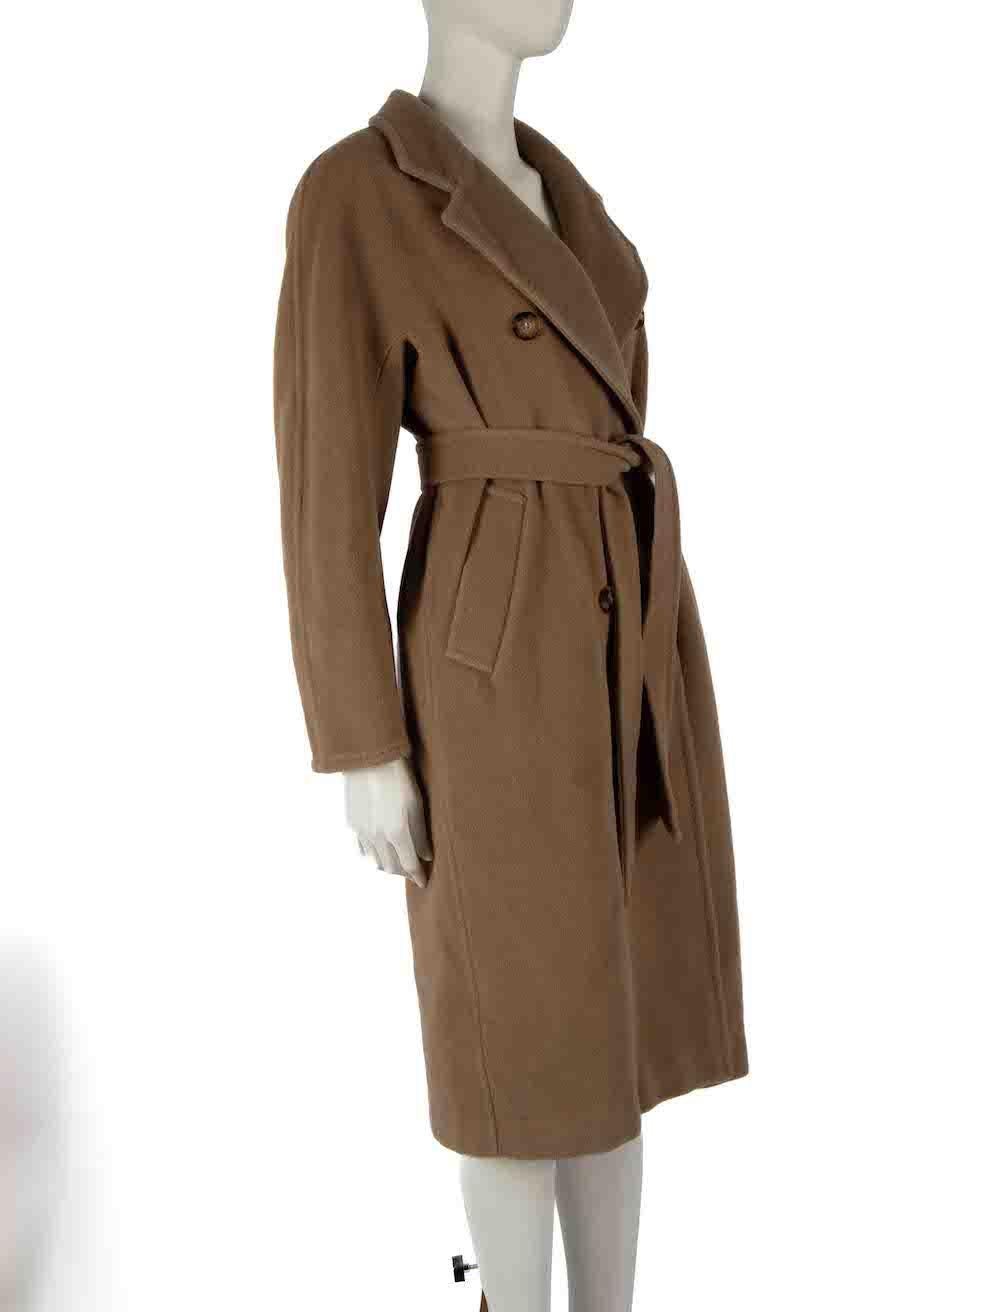 CONDITION is Very good. Minimal wear to coat is evident. The care label has been removed and there is one small abrasion to the back of the coat on this used Max Mara designer resale item.
 
Details
Brown
Cashmere
Coat
Double breasted
Button